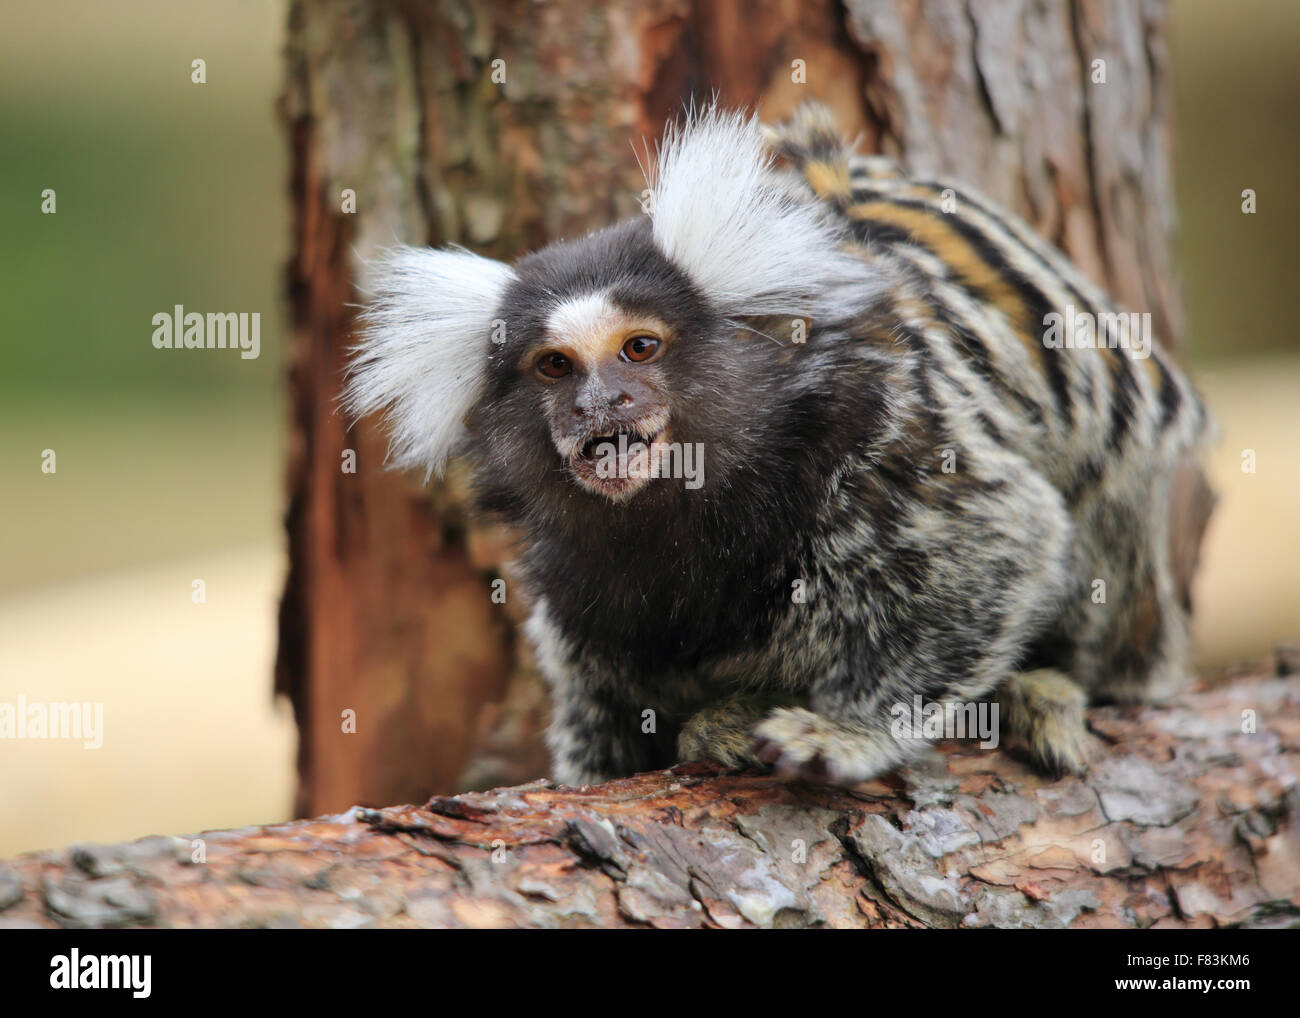 A lovely Common Marmoset on a wooden perch, looking surprised Stock Photo